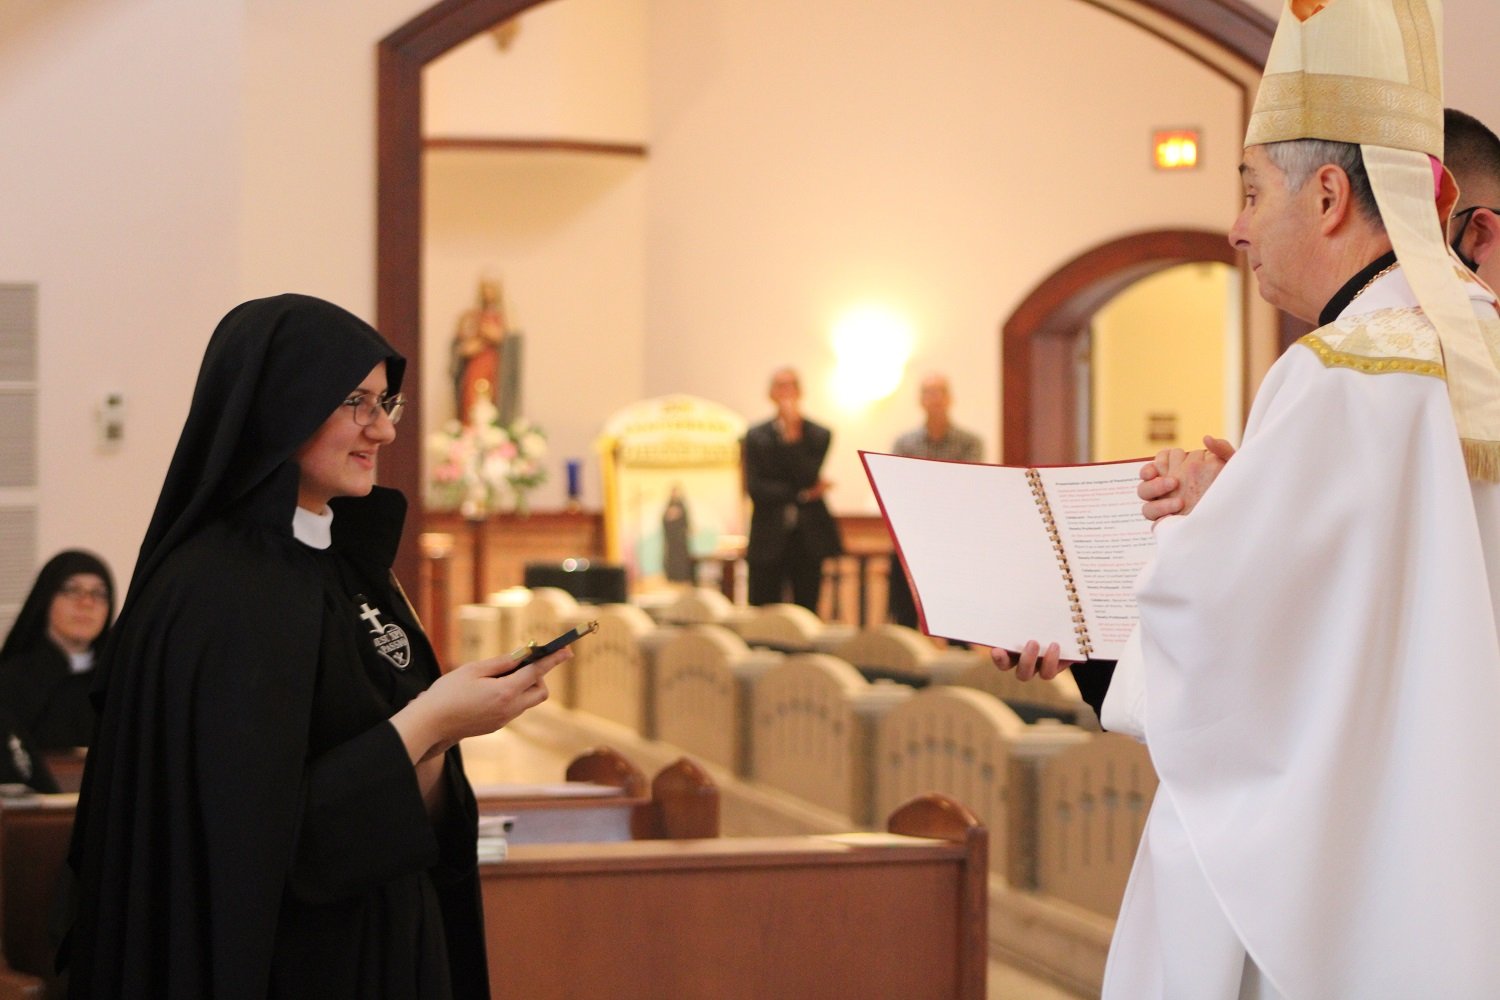  Receiving the Profession Crucifix from Bishop Medley 